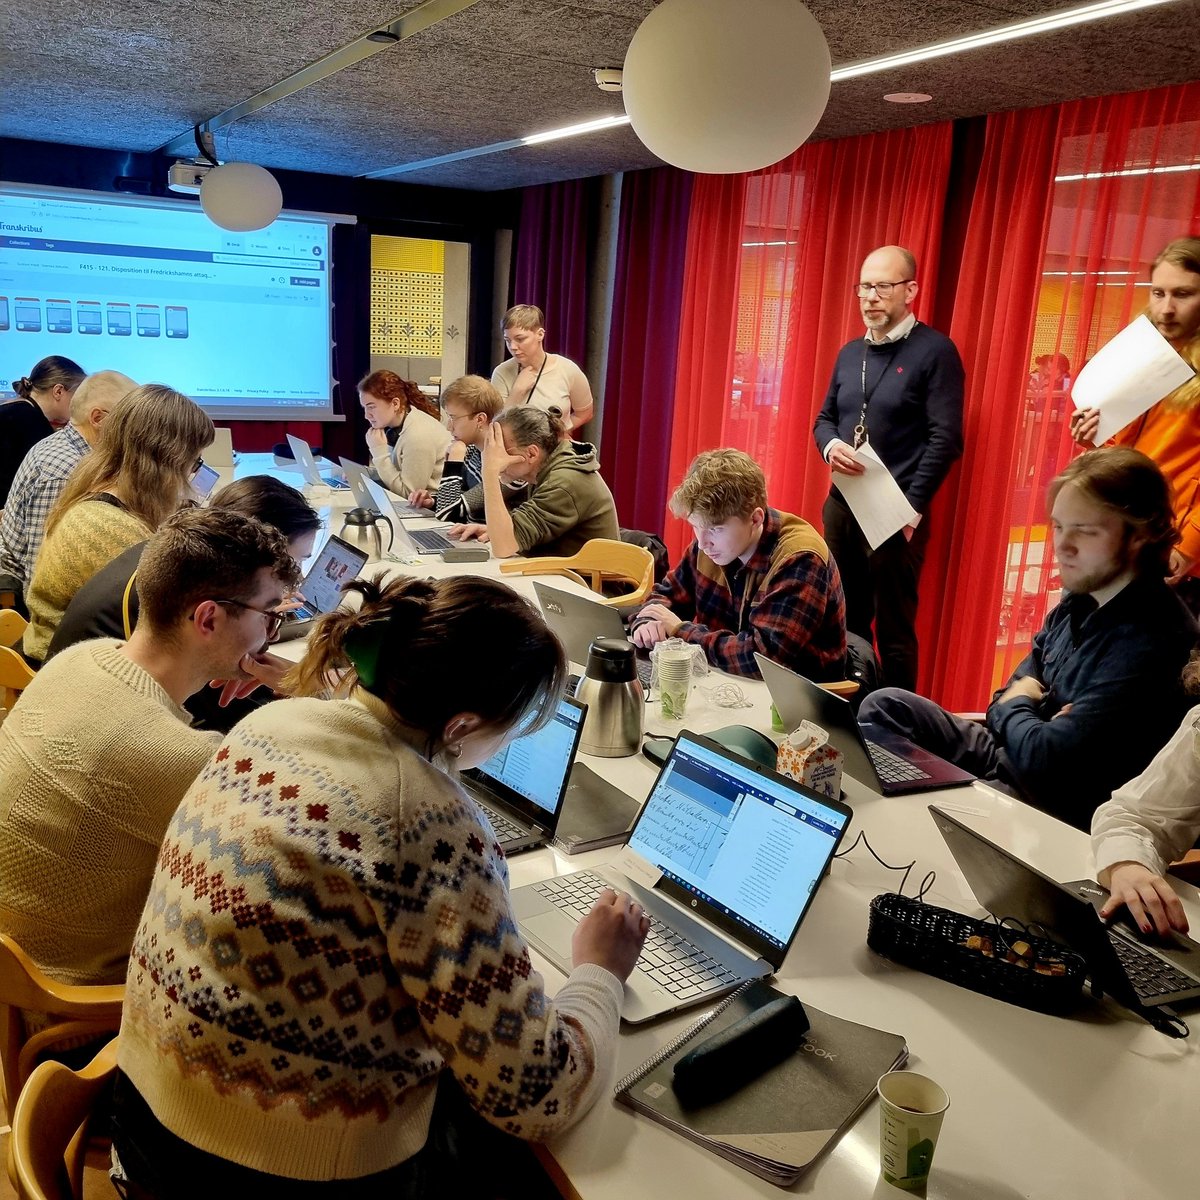 Our 3rd hackathon is up and running, all seats taken, manually correcting machine read documents by Gustav III from the war, 1788-1790, at @UppsalaUniLib